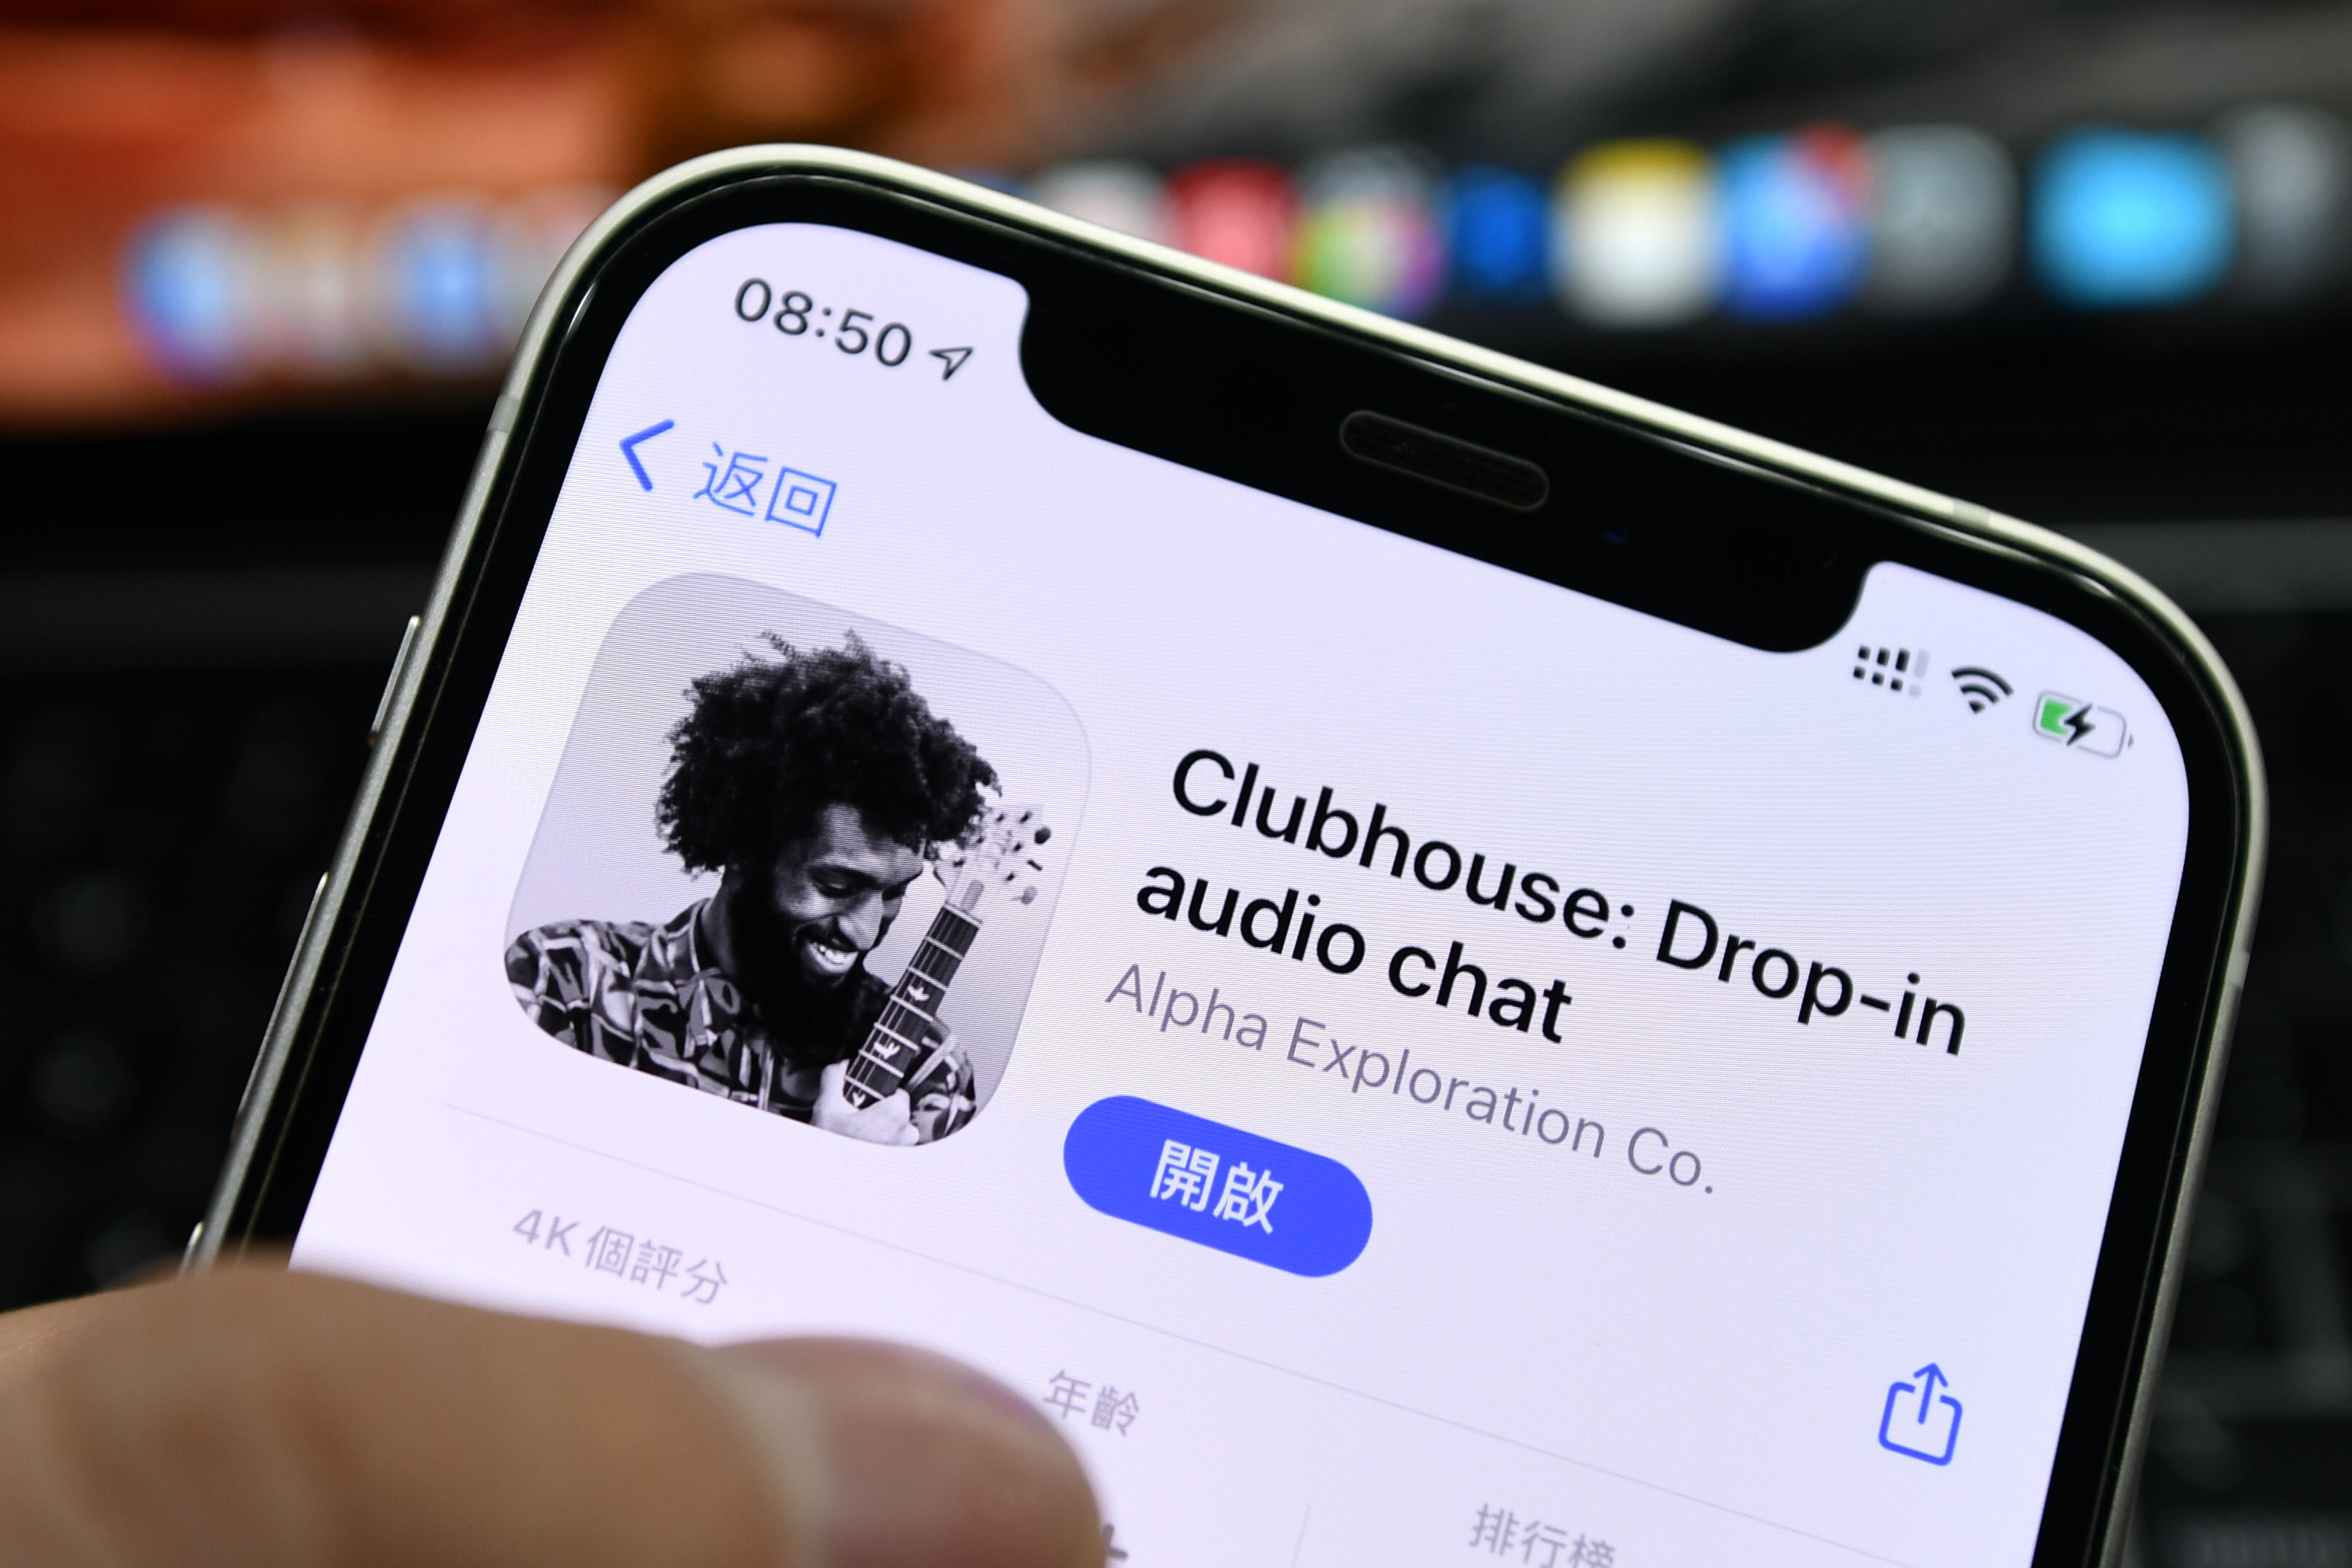 The iPhone app Clubhouse has become a forum for K-pop artists to connect with fans and fellow musicians. Photo: Sheldon Cooper/SOPA Images/LightRocket via Getty Images